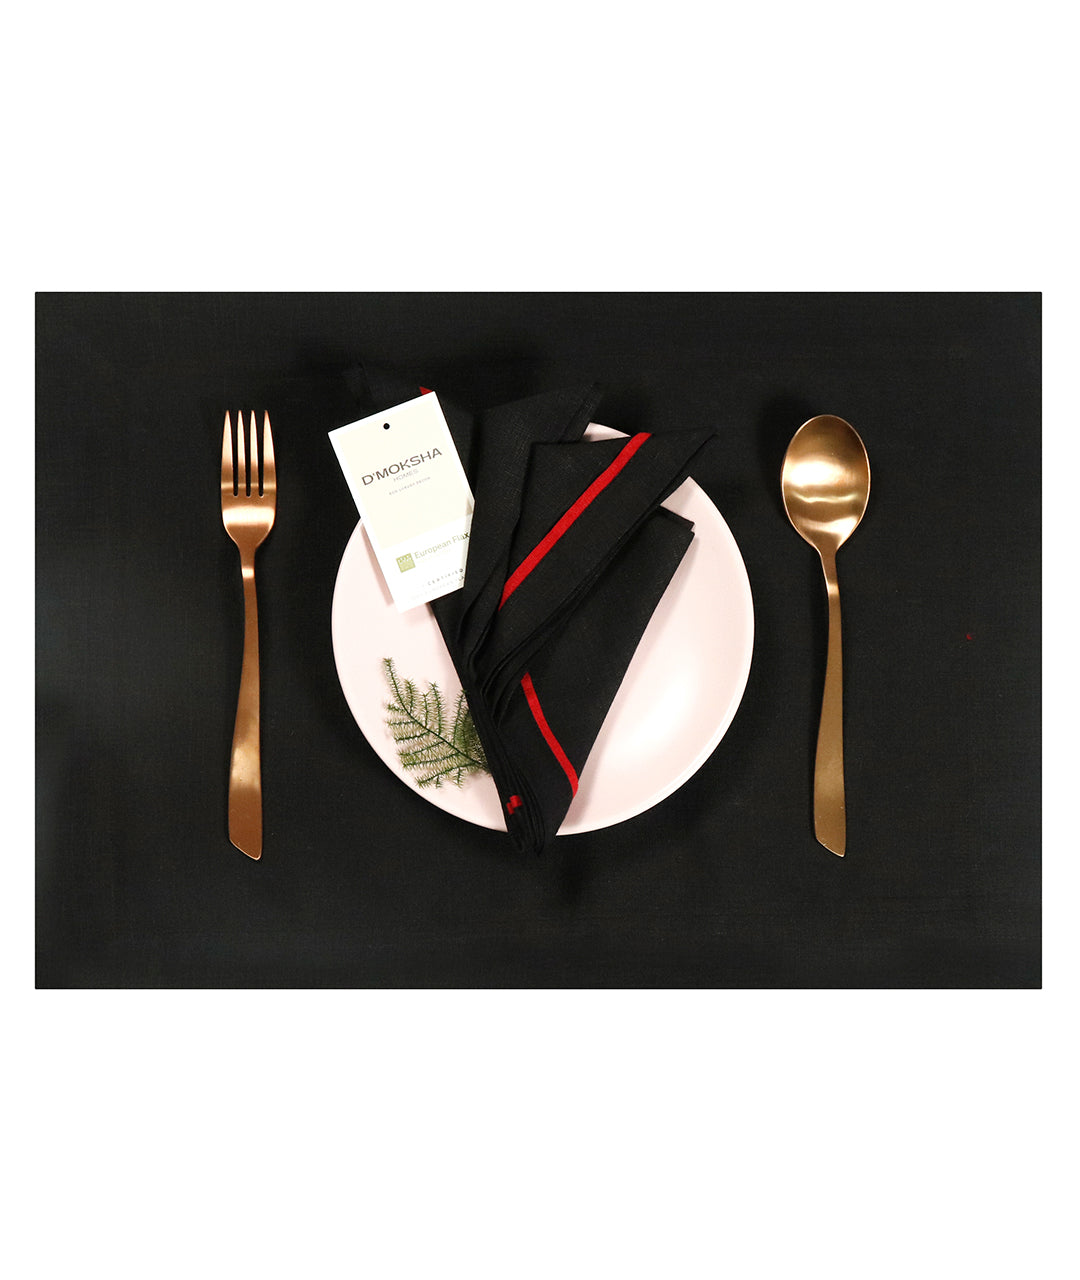 Black & Red Linen Placemats 14 x 19 Inch Set of 4 - Reversible